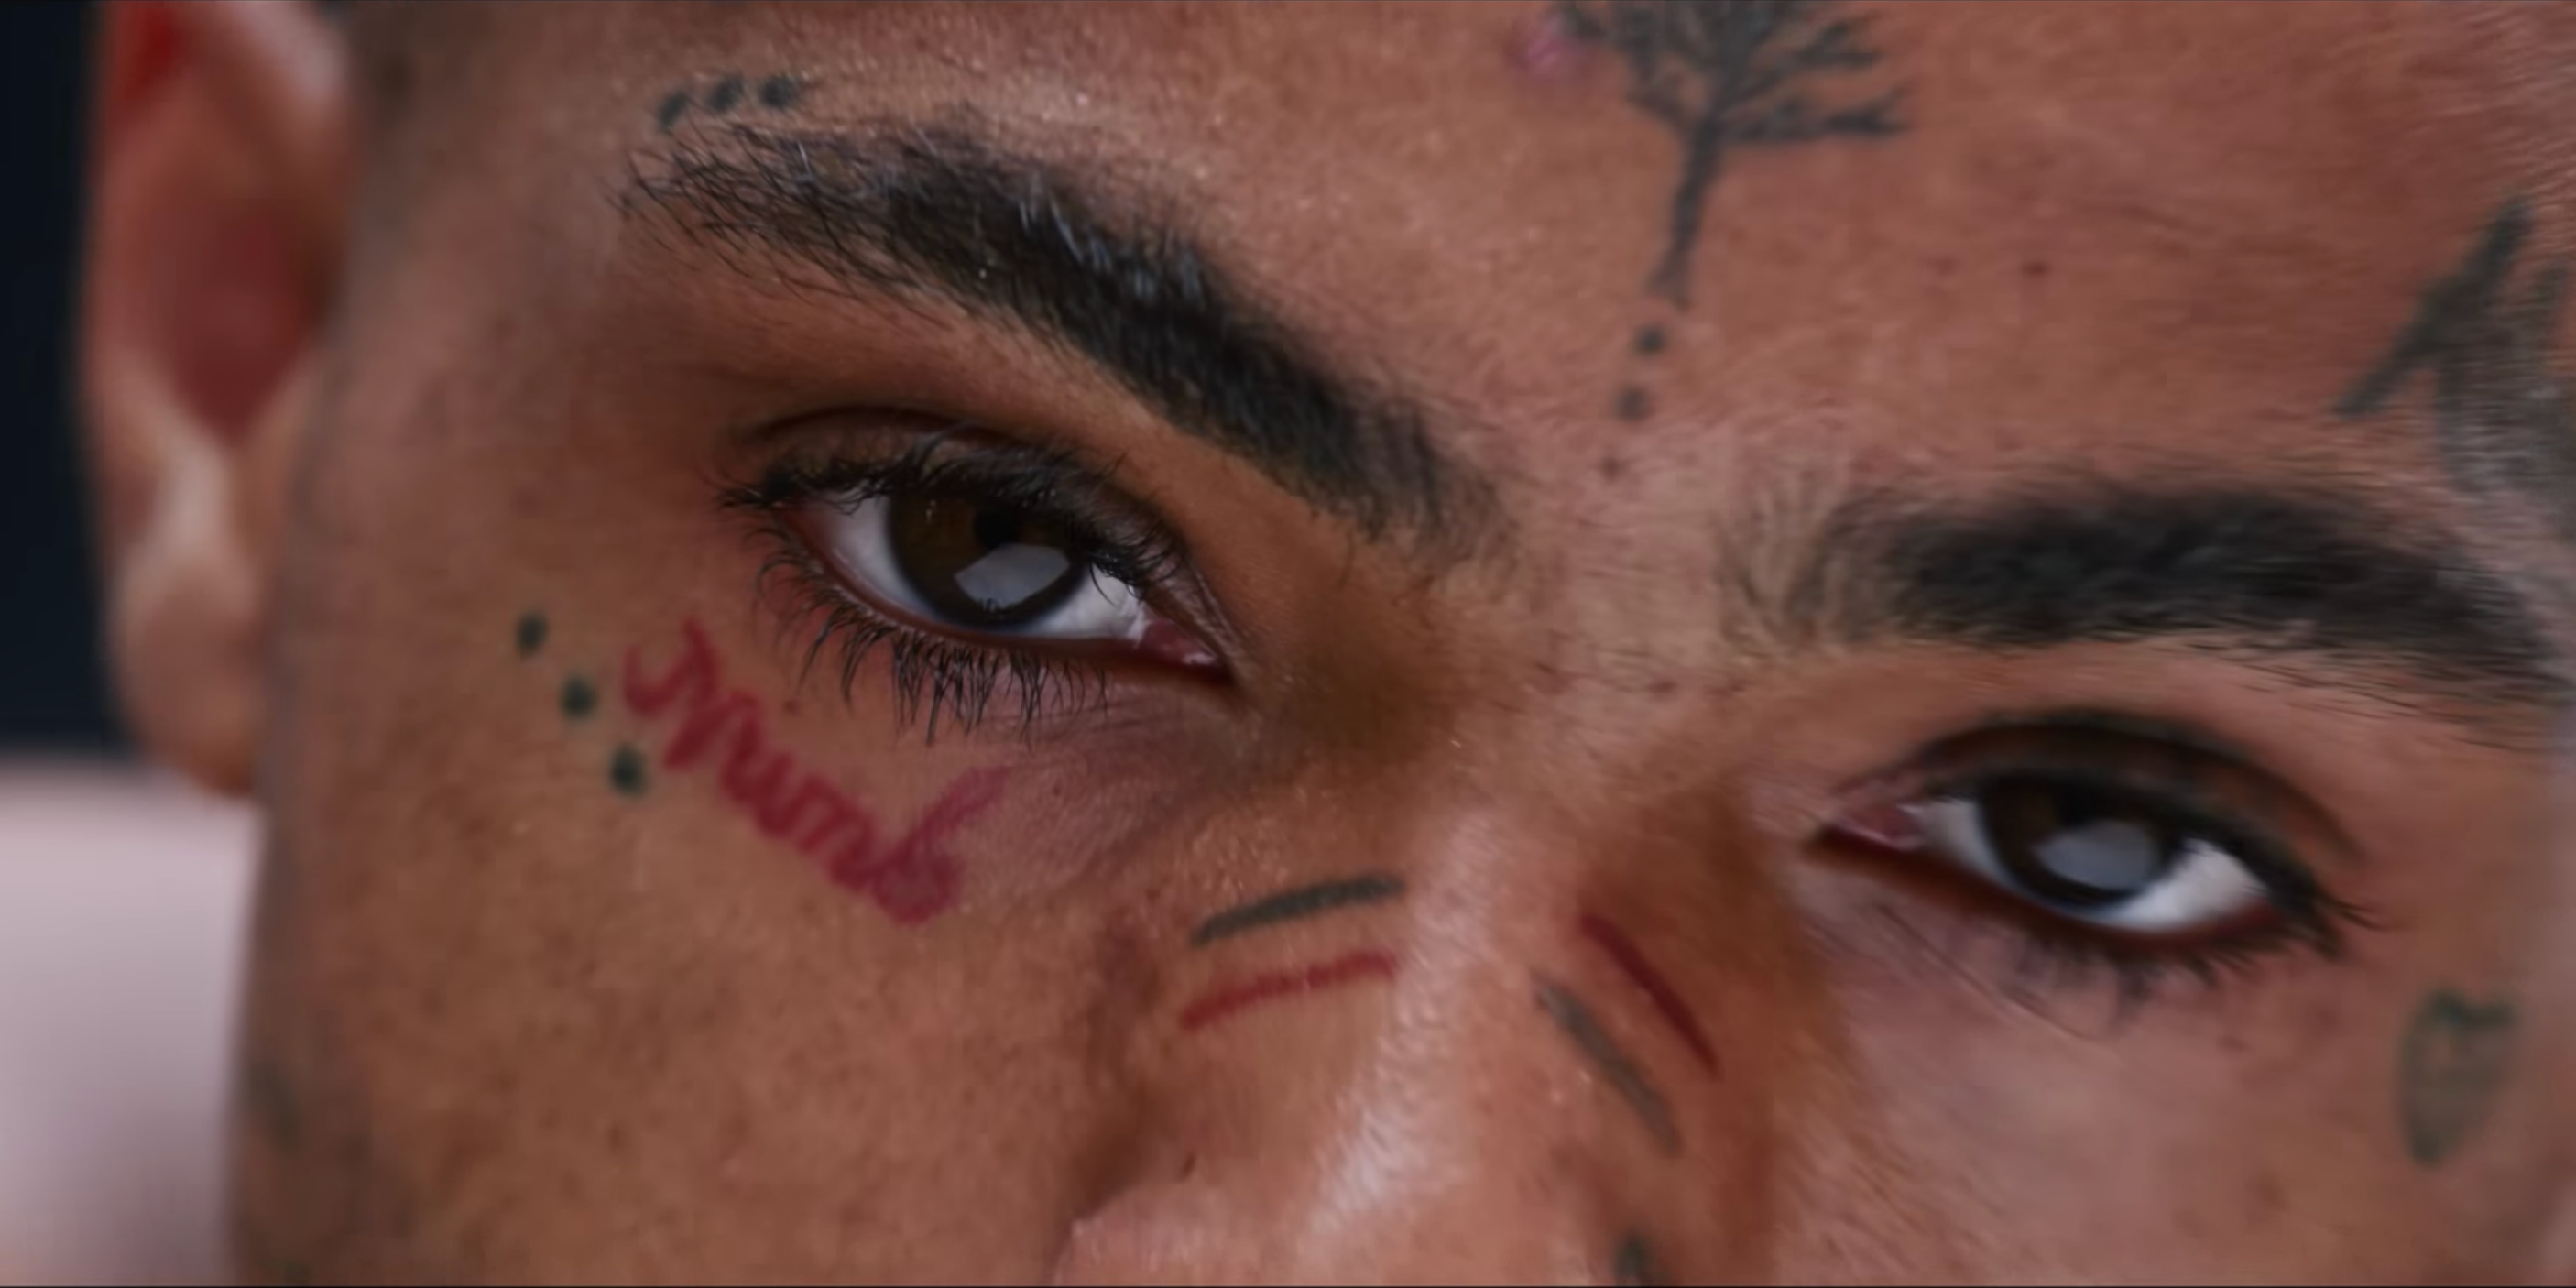 How To Recreate The Eye Zoom Transition From Xxxtentacion S Sad Video